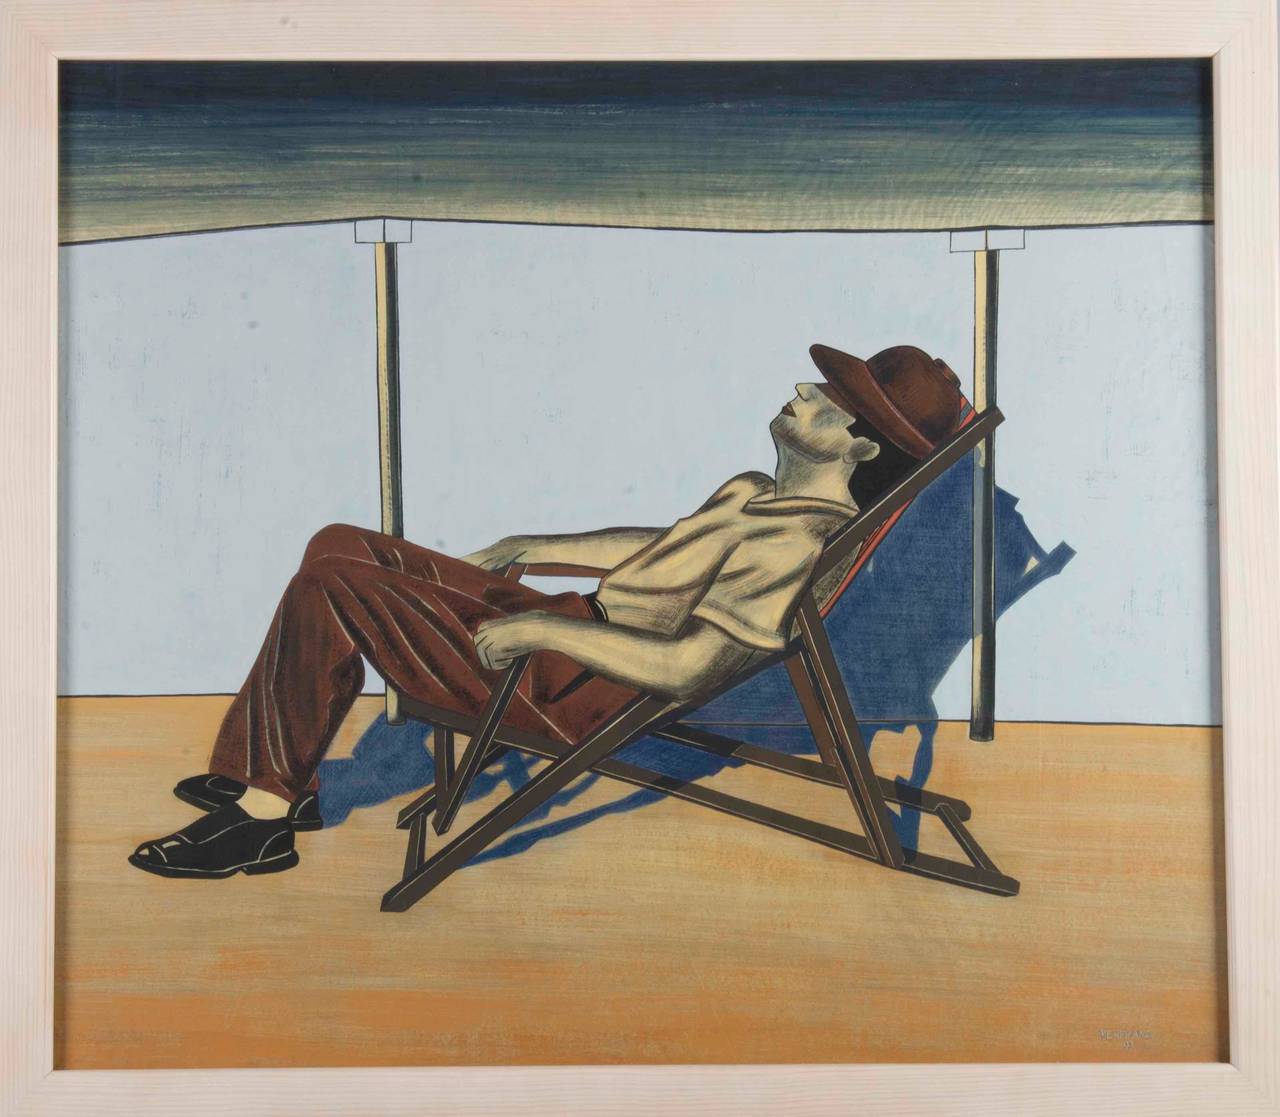 Bruno Vekemans (Antwerp, 1952), man on deckchair, signed and dated lower right: Vekemans '93, gouache on old pattern paper, 97 x 111 cm

Bruno Vekemans is part of a long tradition of Flemish painters, a tradition that has never been broken, not